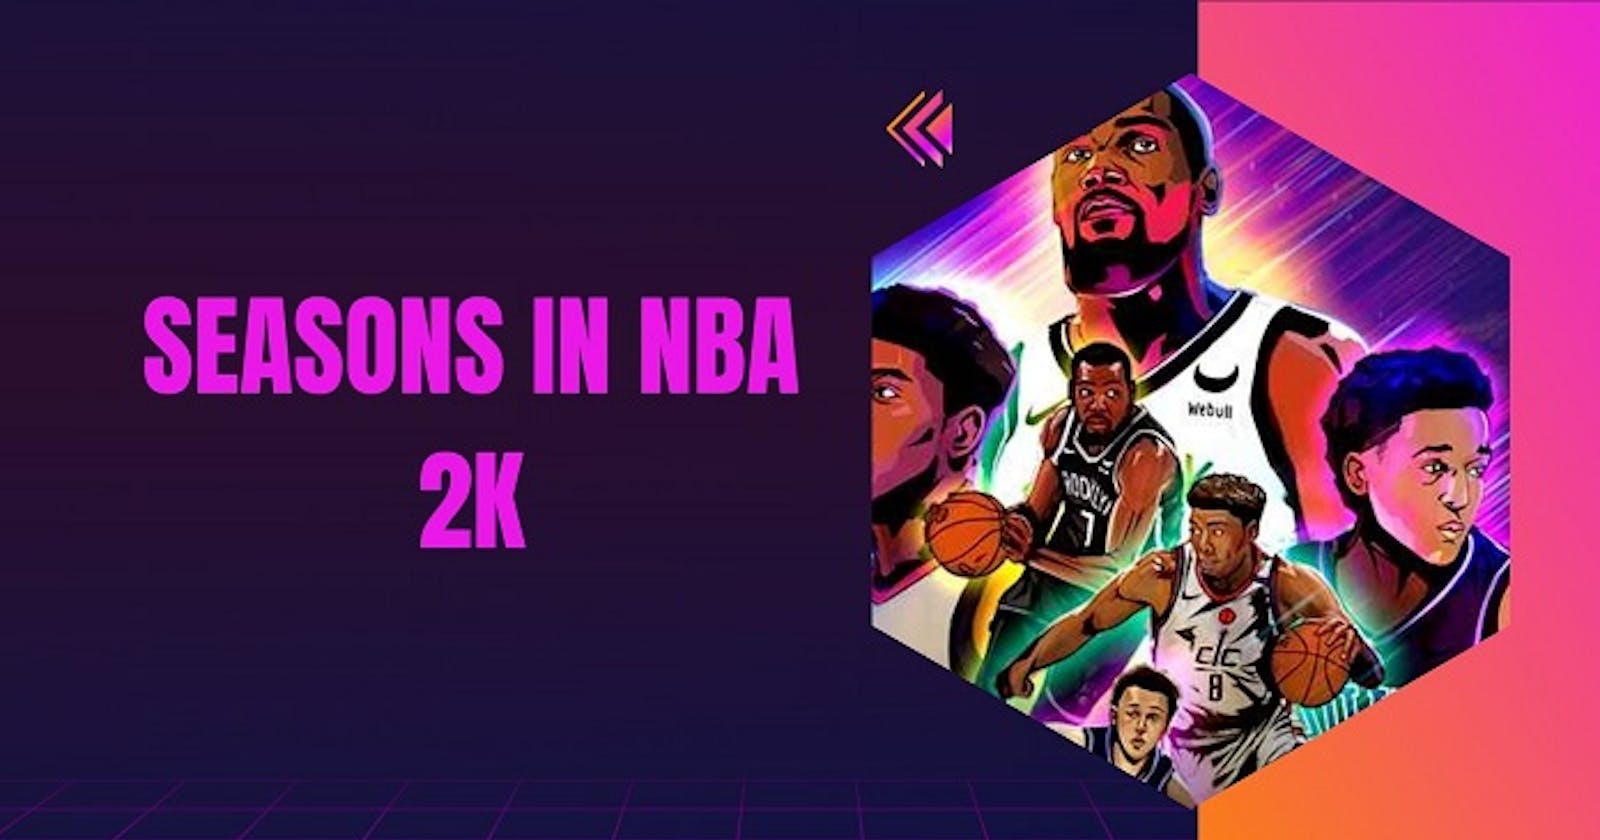 What Are Seasons In NBA 2k22?